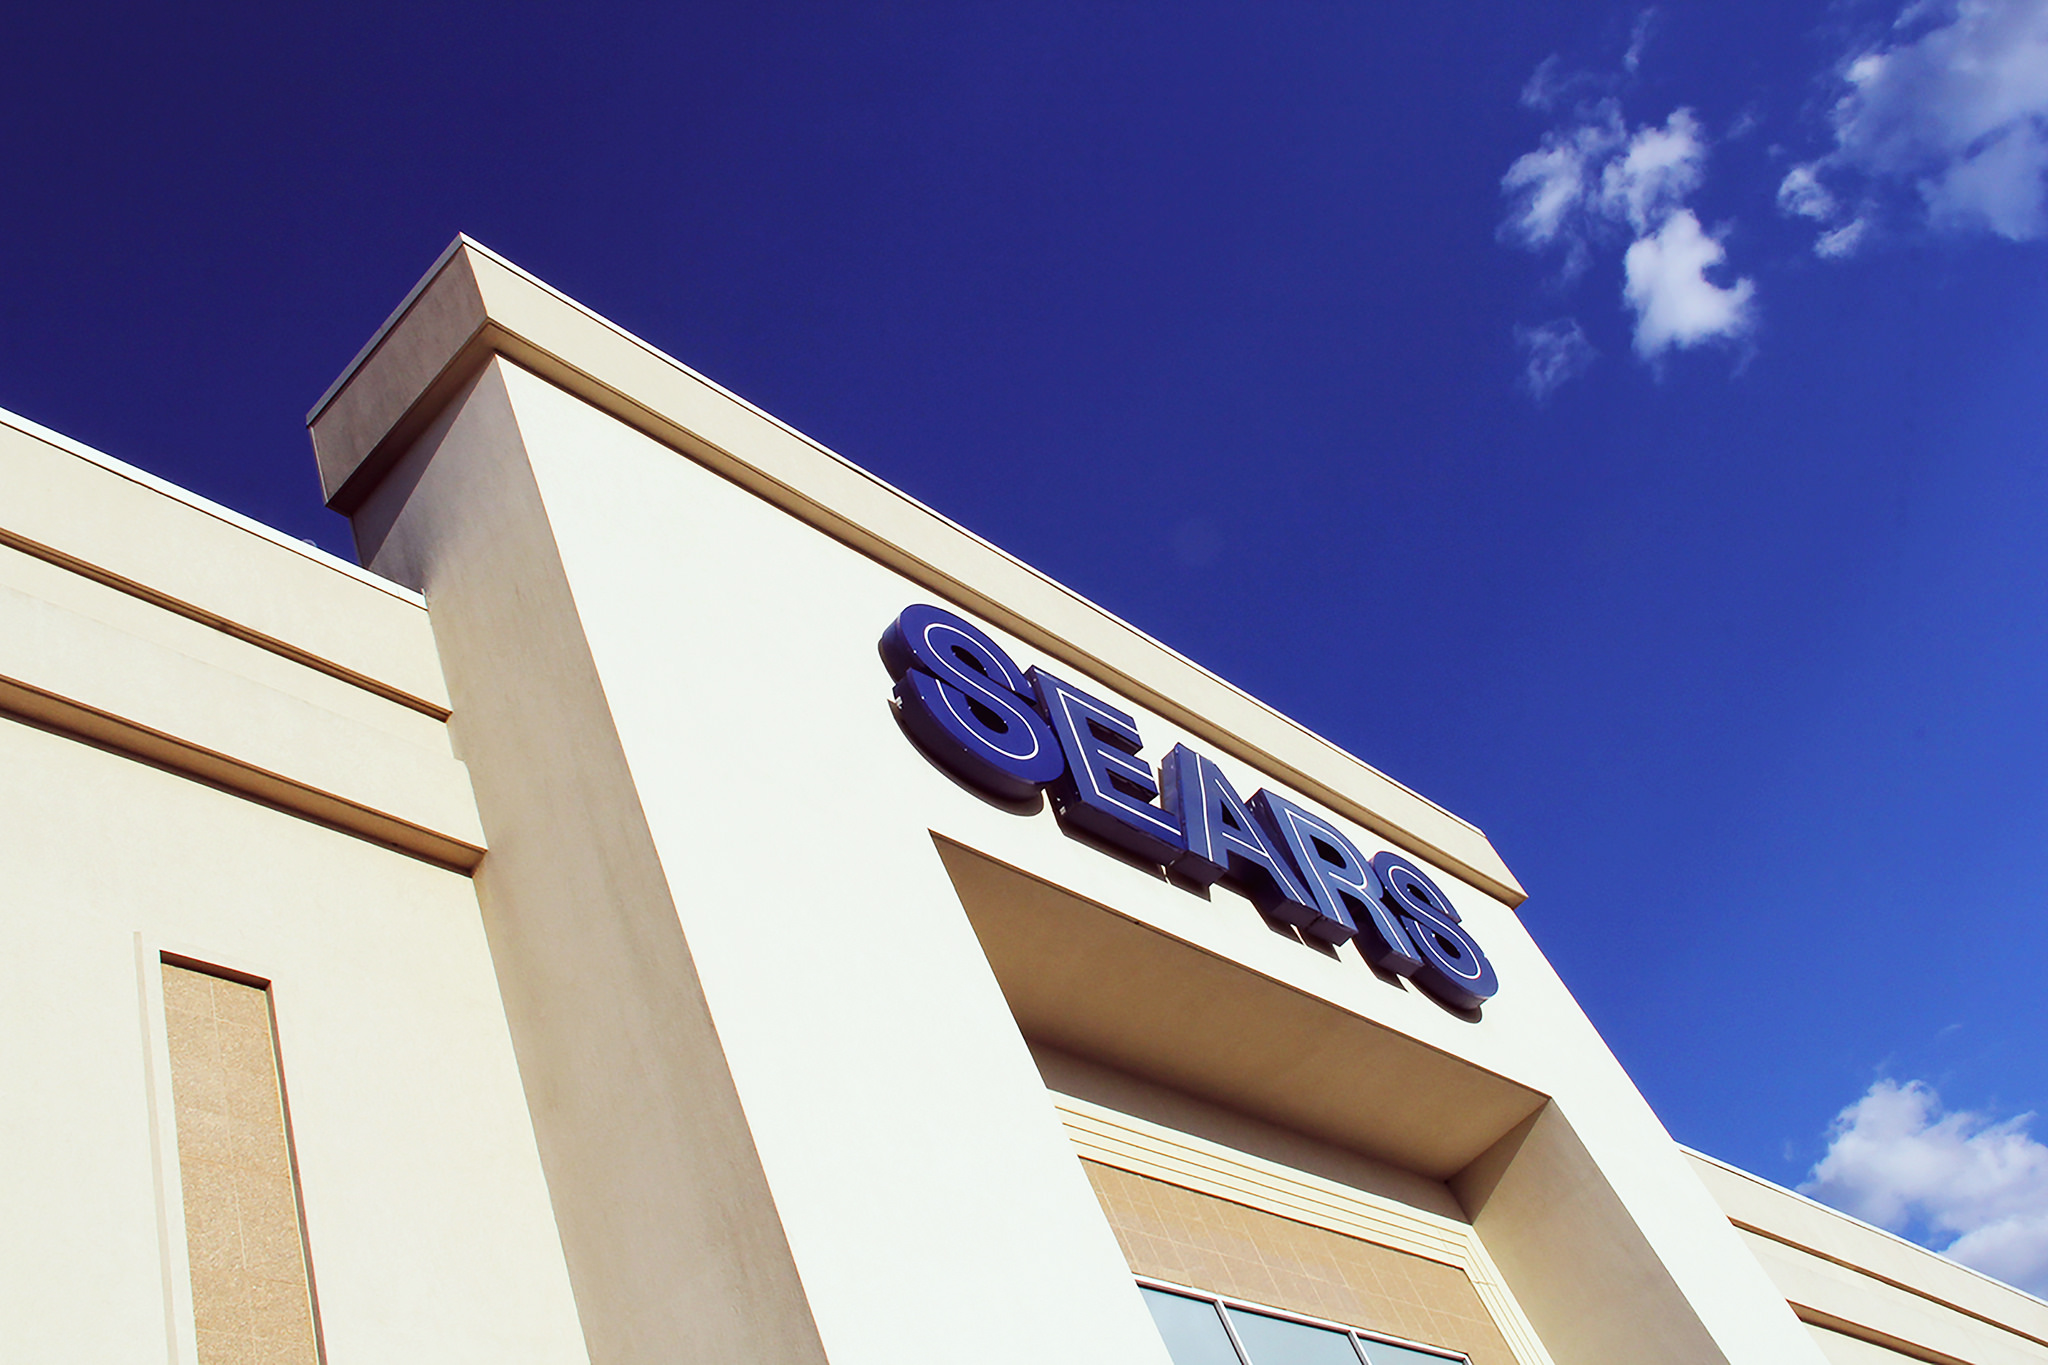 Sears Loses $580 Million In Last Quarter Of 2015, Still Working On That ‘Transformation’ Thing